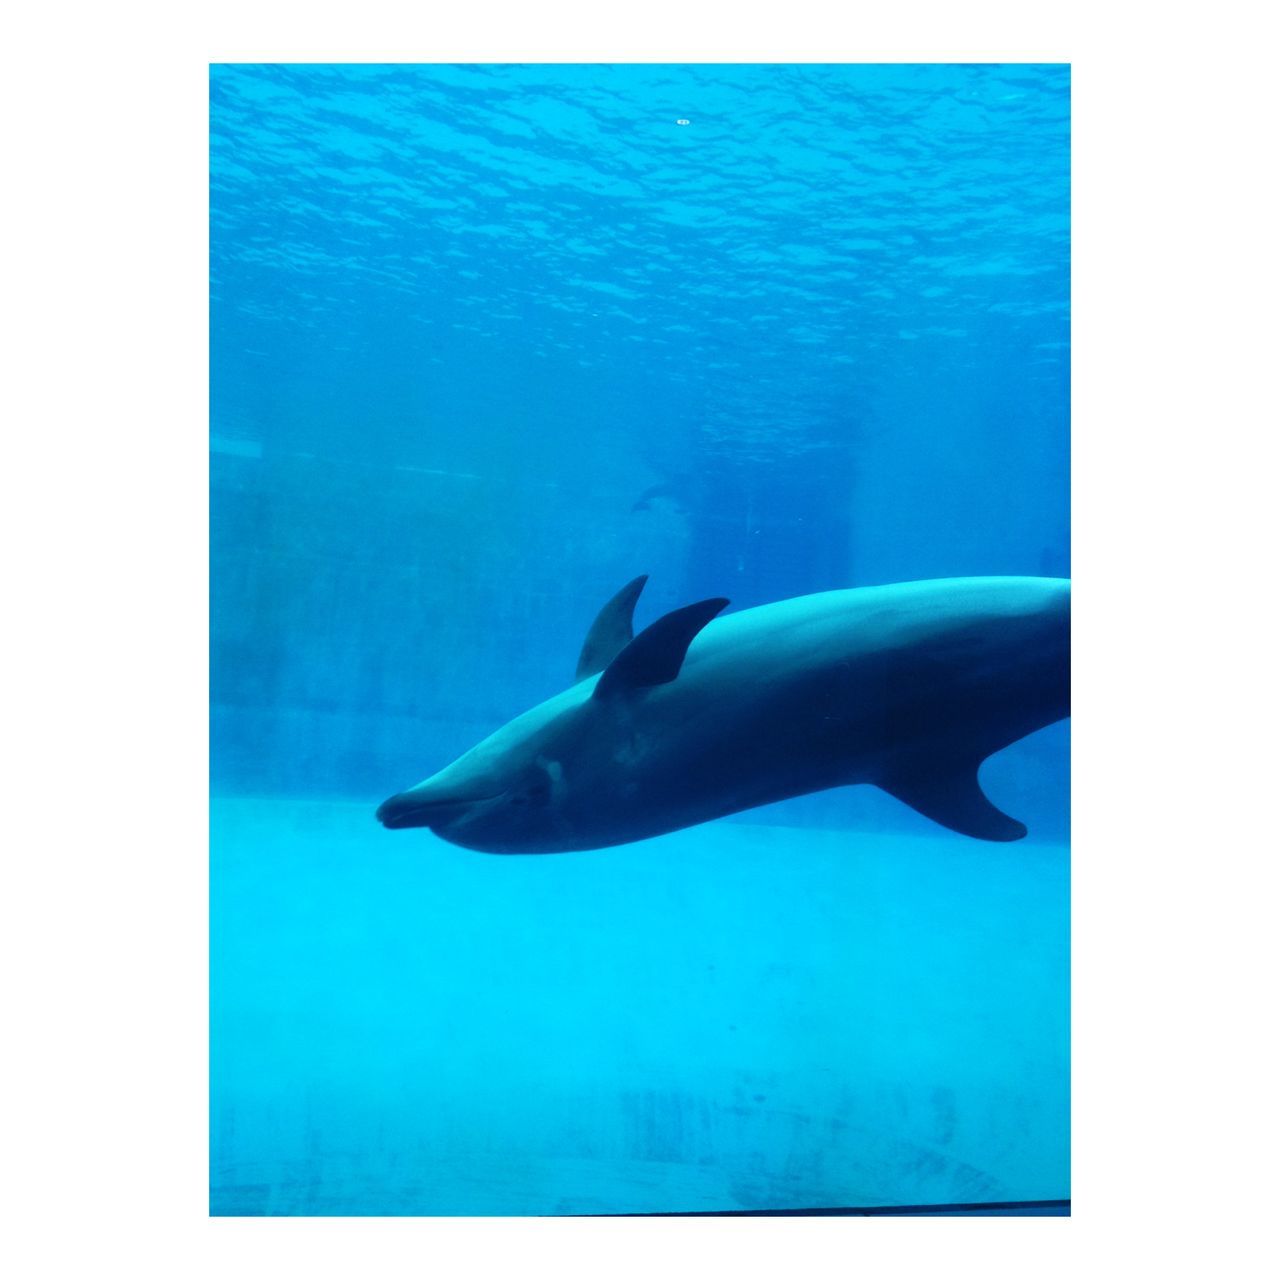 animal themes, underwater, swimming, water, animals in the wild, wildlife, sea life, fish, blue, sea, one animal, undersea, aquarium, auto post production filter, nature, zoology, full length, transfer print, dolphin, beauty in nature